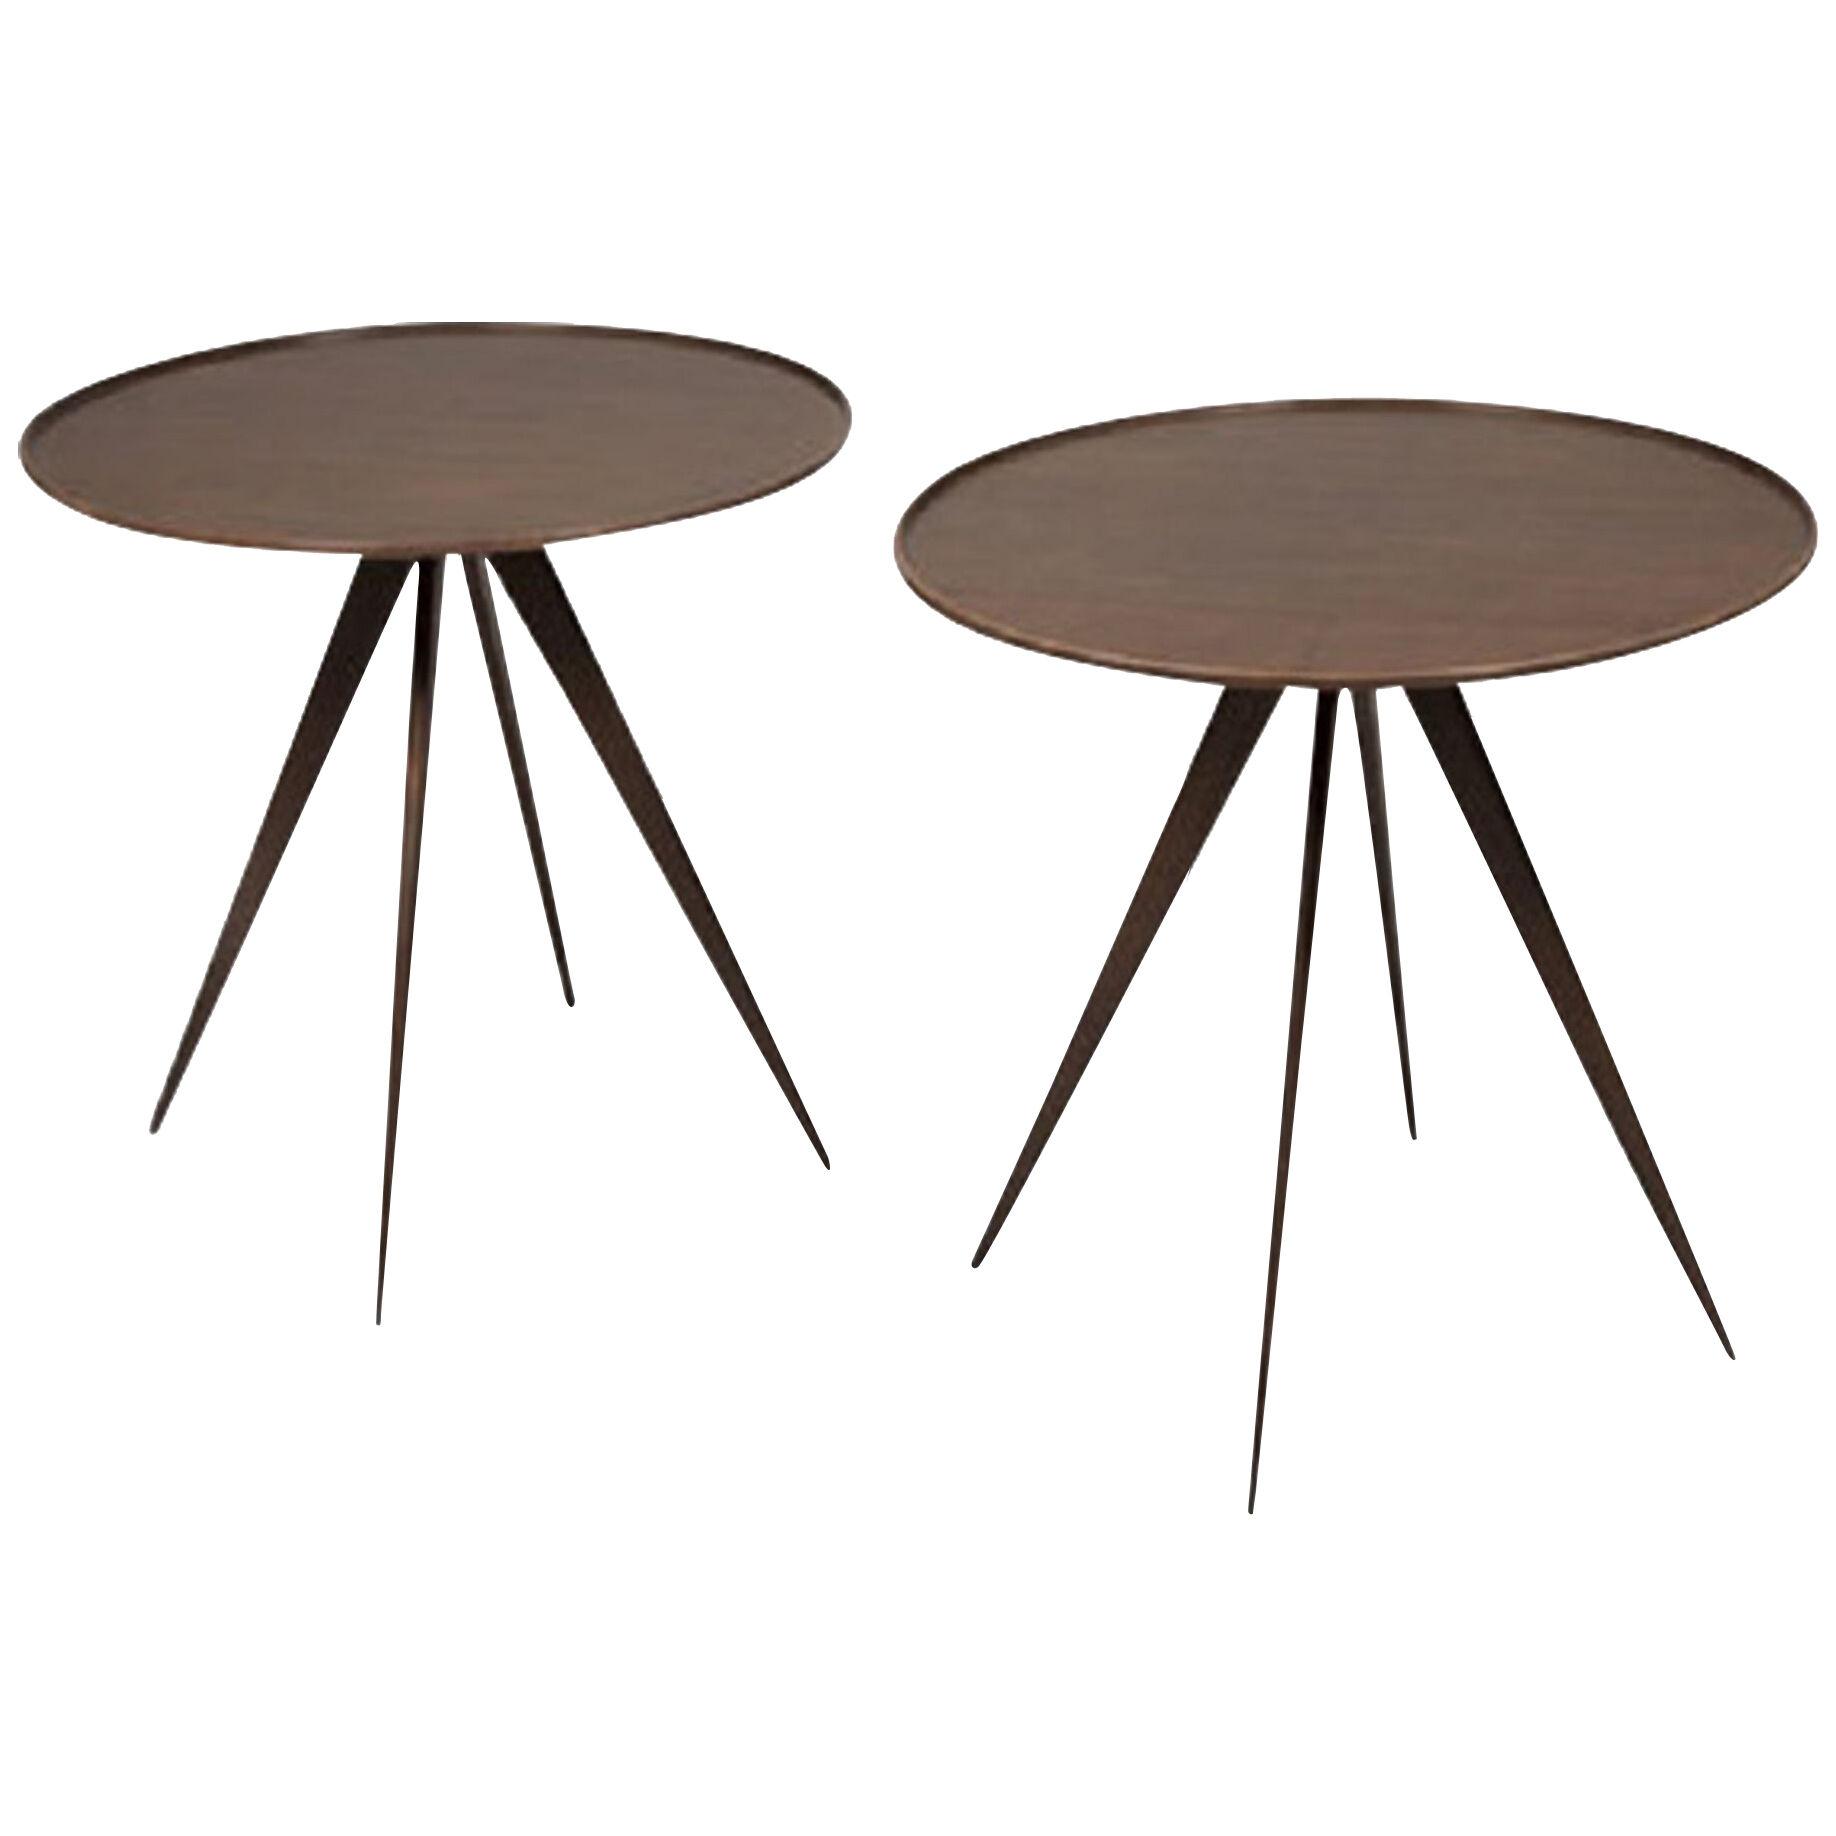 Pair of Mid-Century Style Side Tables